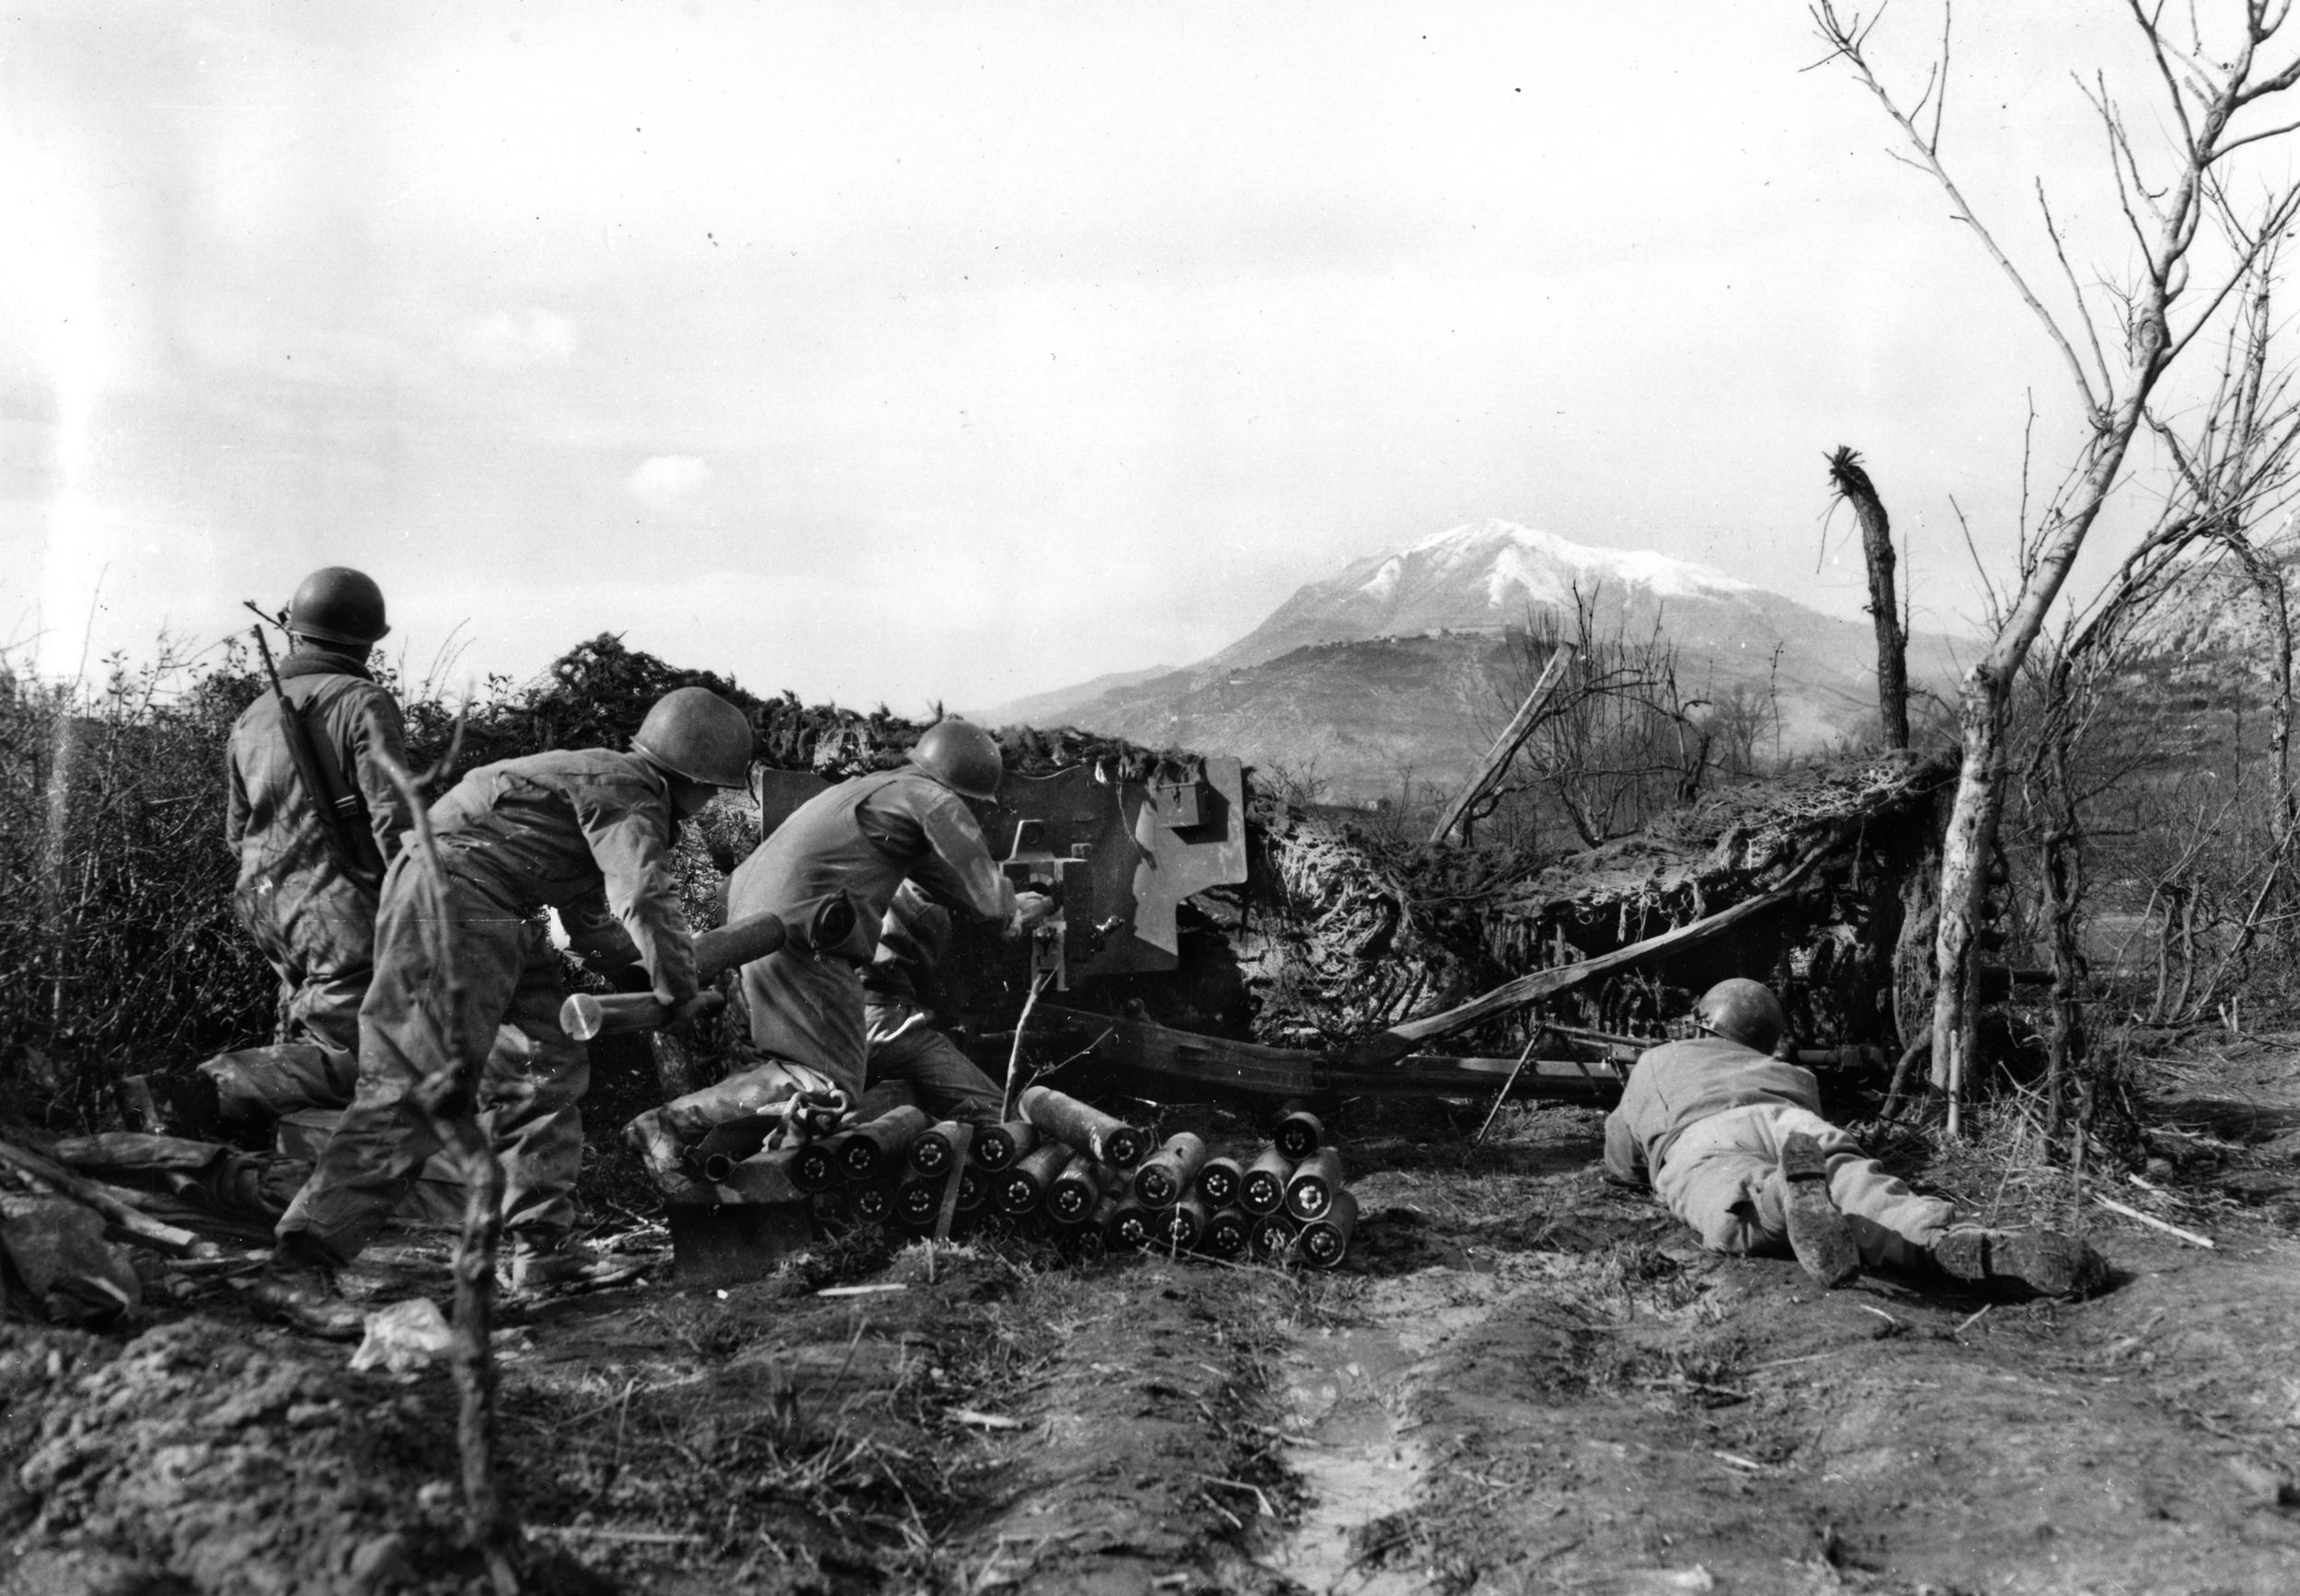 Soldiers of the 36th Infantry Division fire an antitank gun on the Rapido River in February 1944 during the Italian Campaign.  The attempt to cross the Rapido was costly to the American forces.